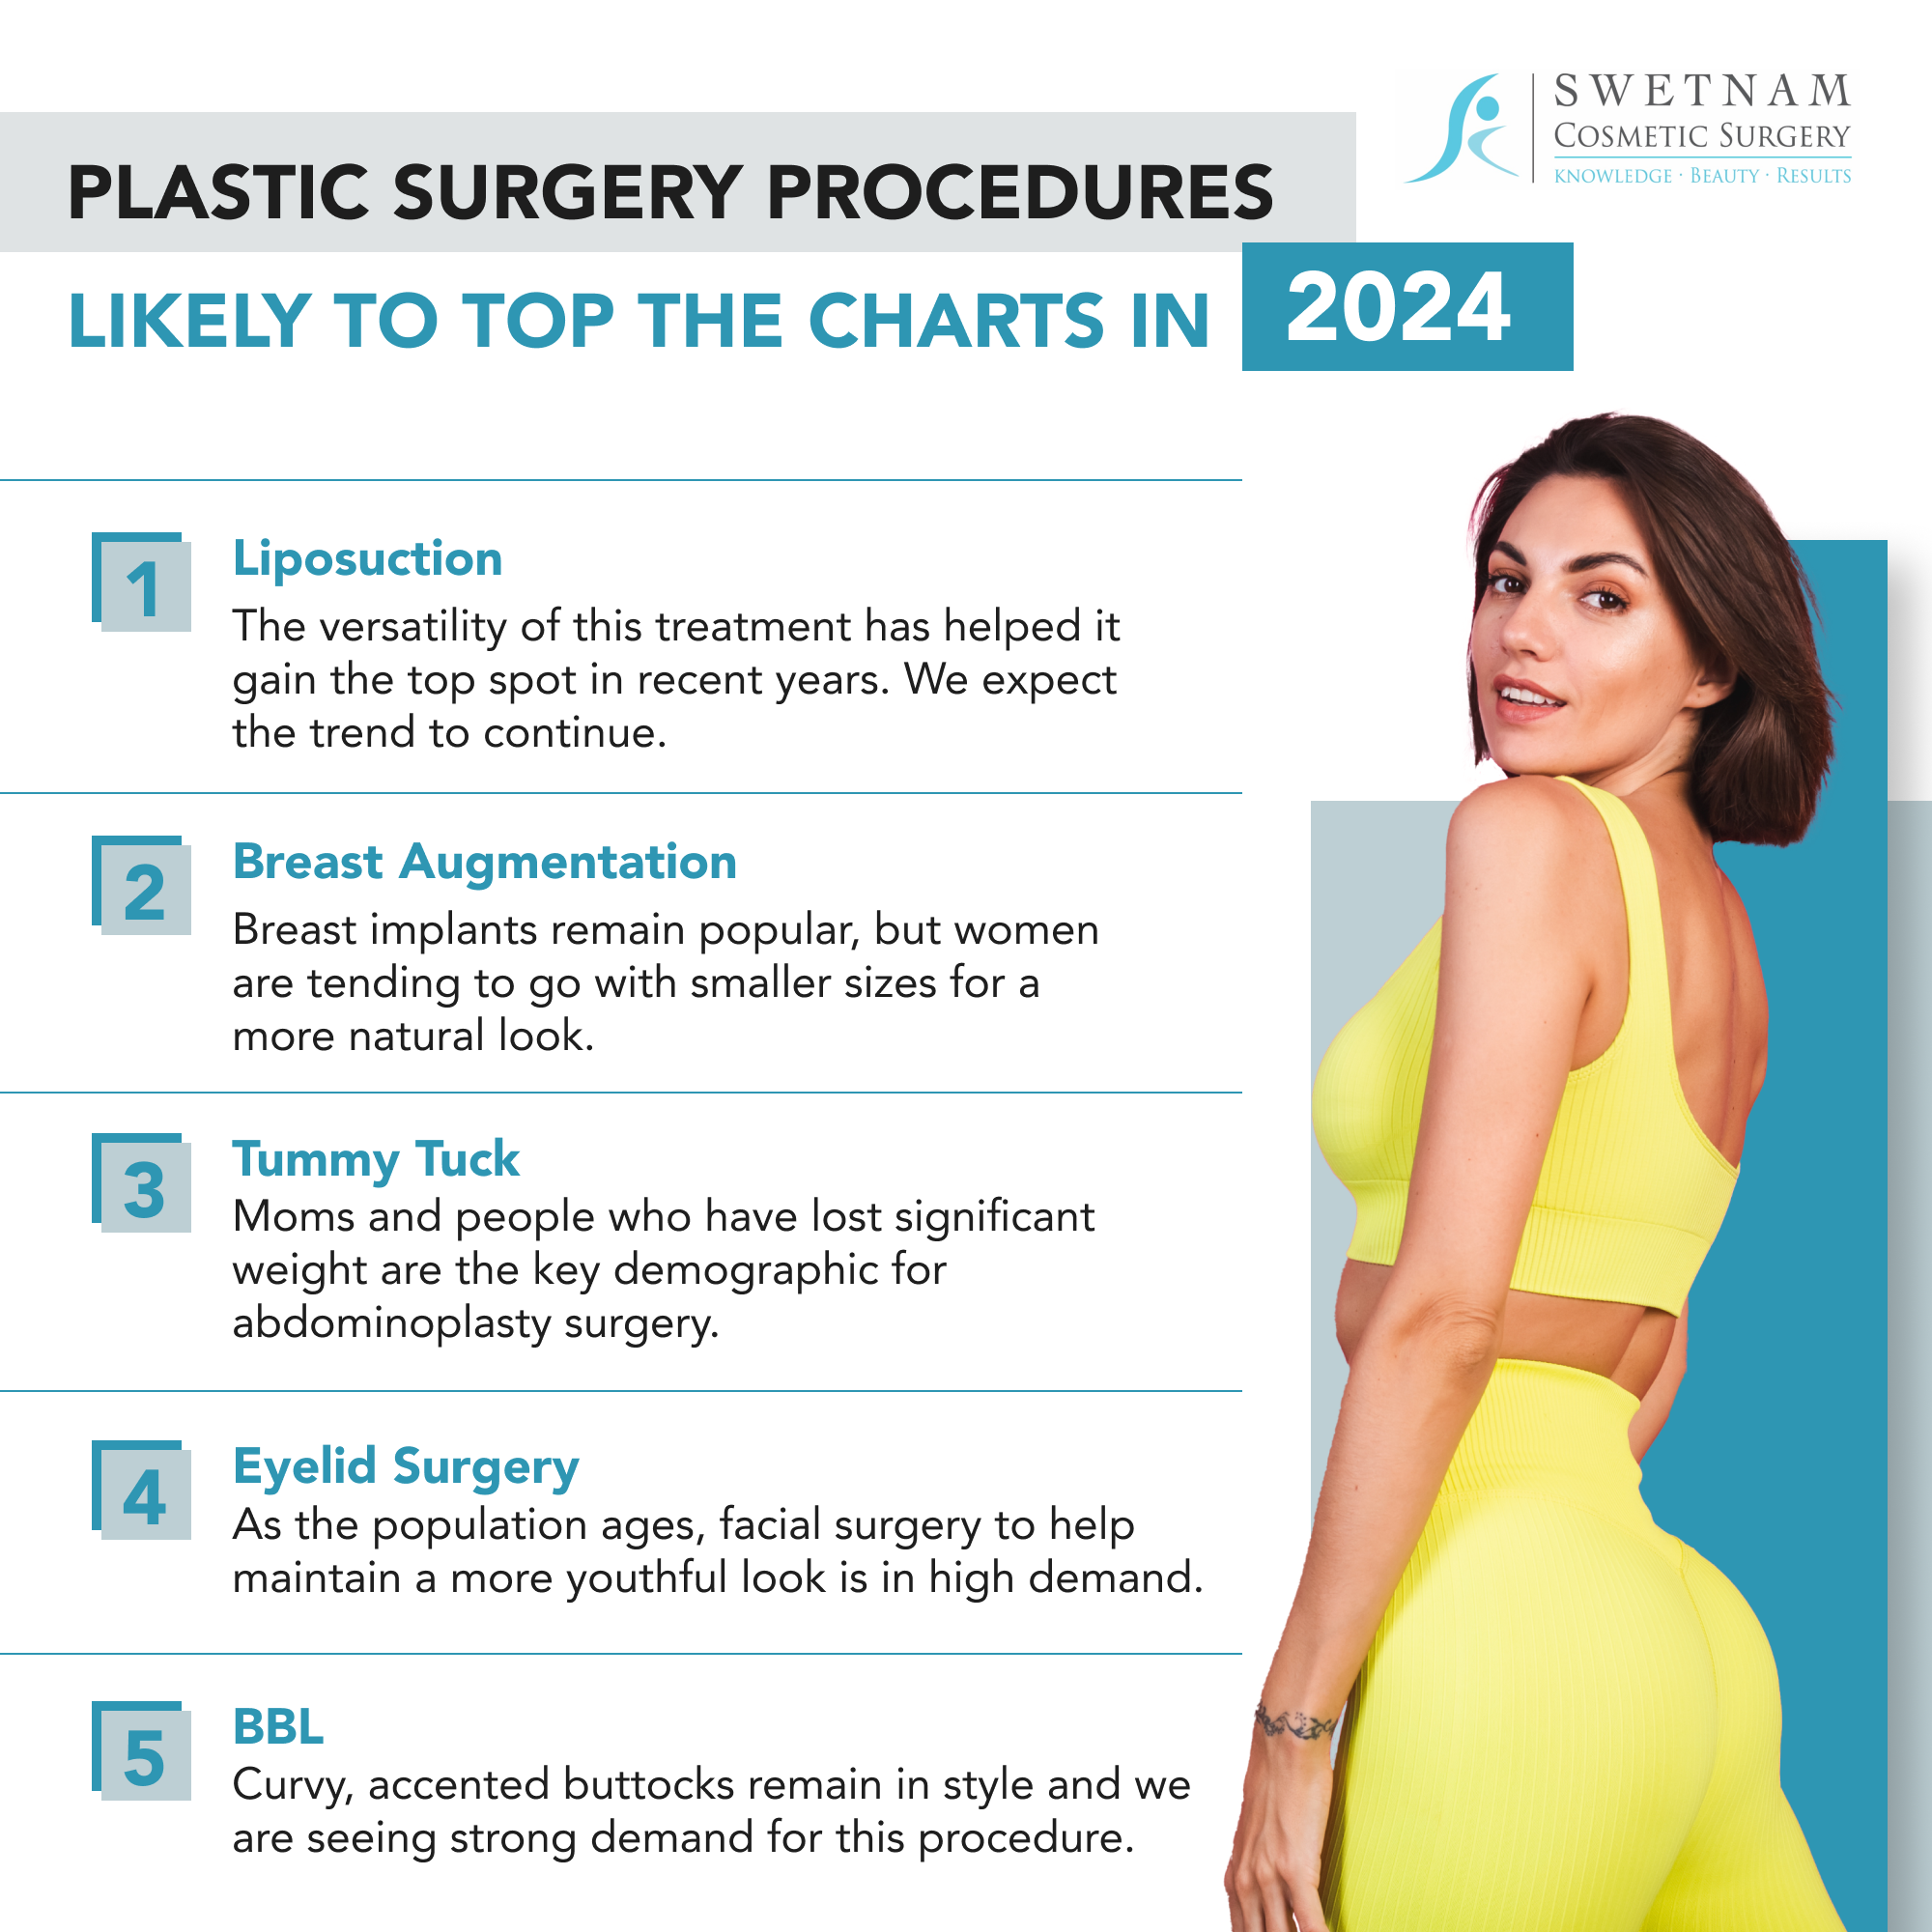 PLASTIC SURGERY PROCEDURES LIKELY TO TOP THE CHARTS IN 2024